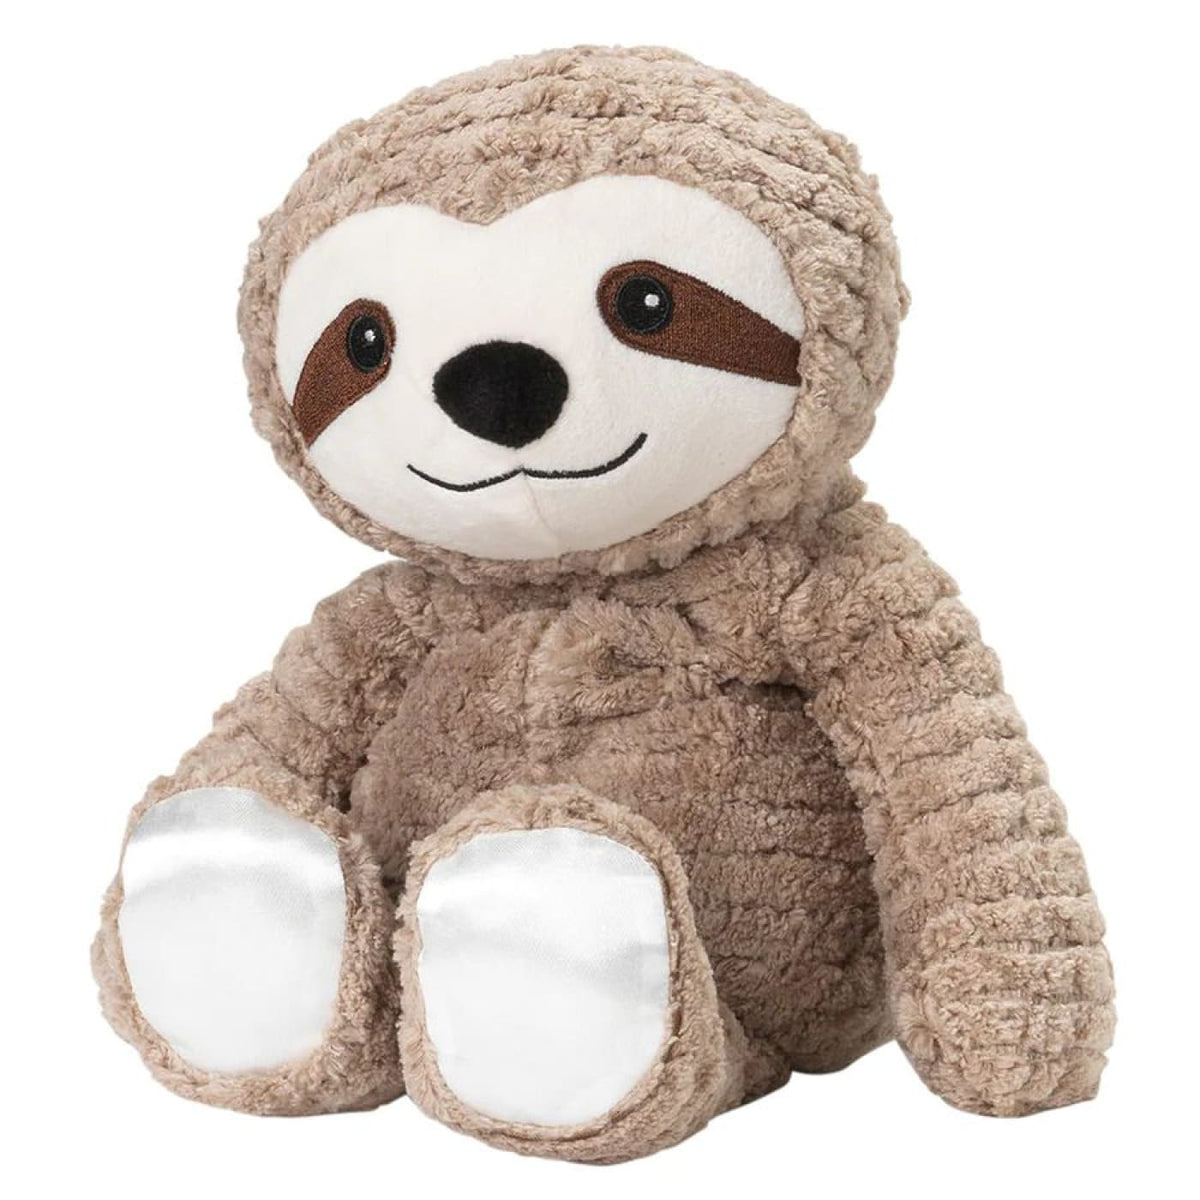 Warmies My First Heatable Soft Toy Scented with French Lavender - Sloth - Sloth - HEALTH &amp; HOME SAFETY - THERMOMETERS/MEDICINAL